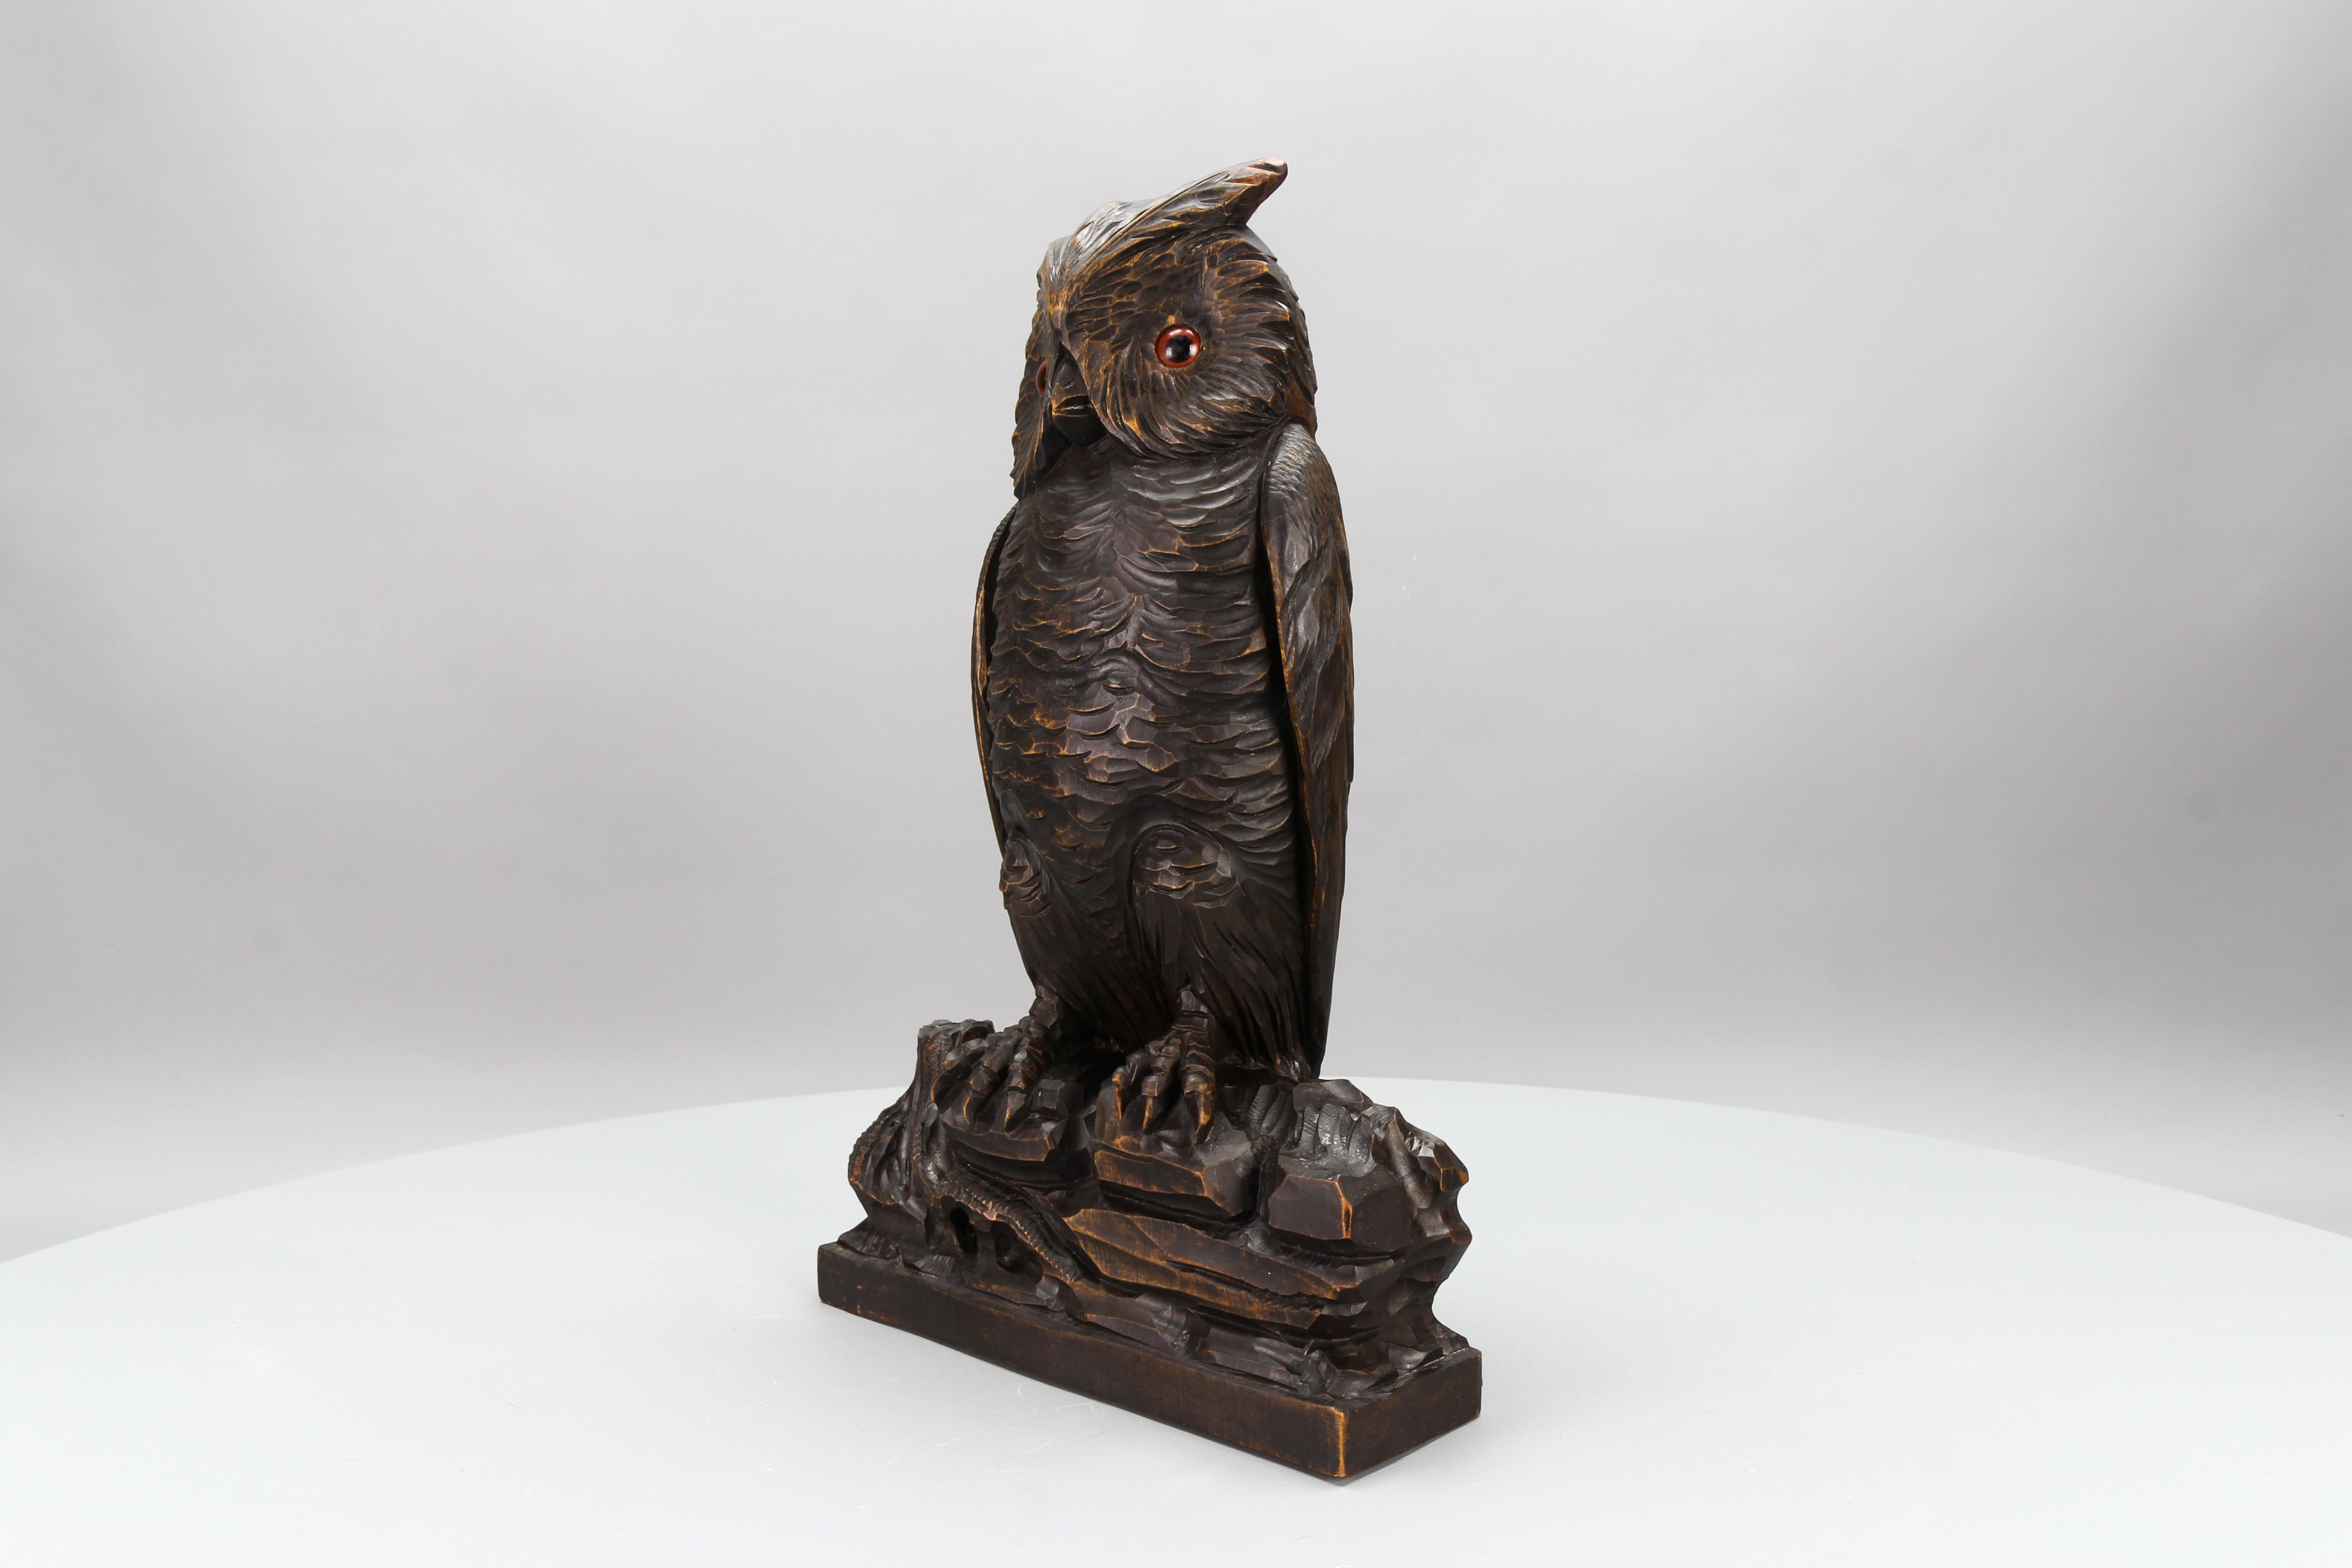 Antique German Black Forest Style Carved Owl Sculpture with Glass Eyes, ca. 1920 For Sale 4